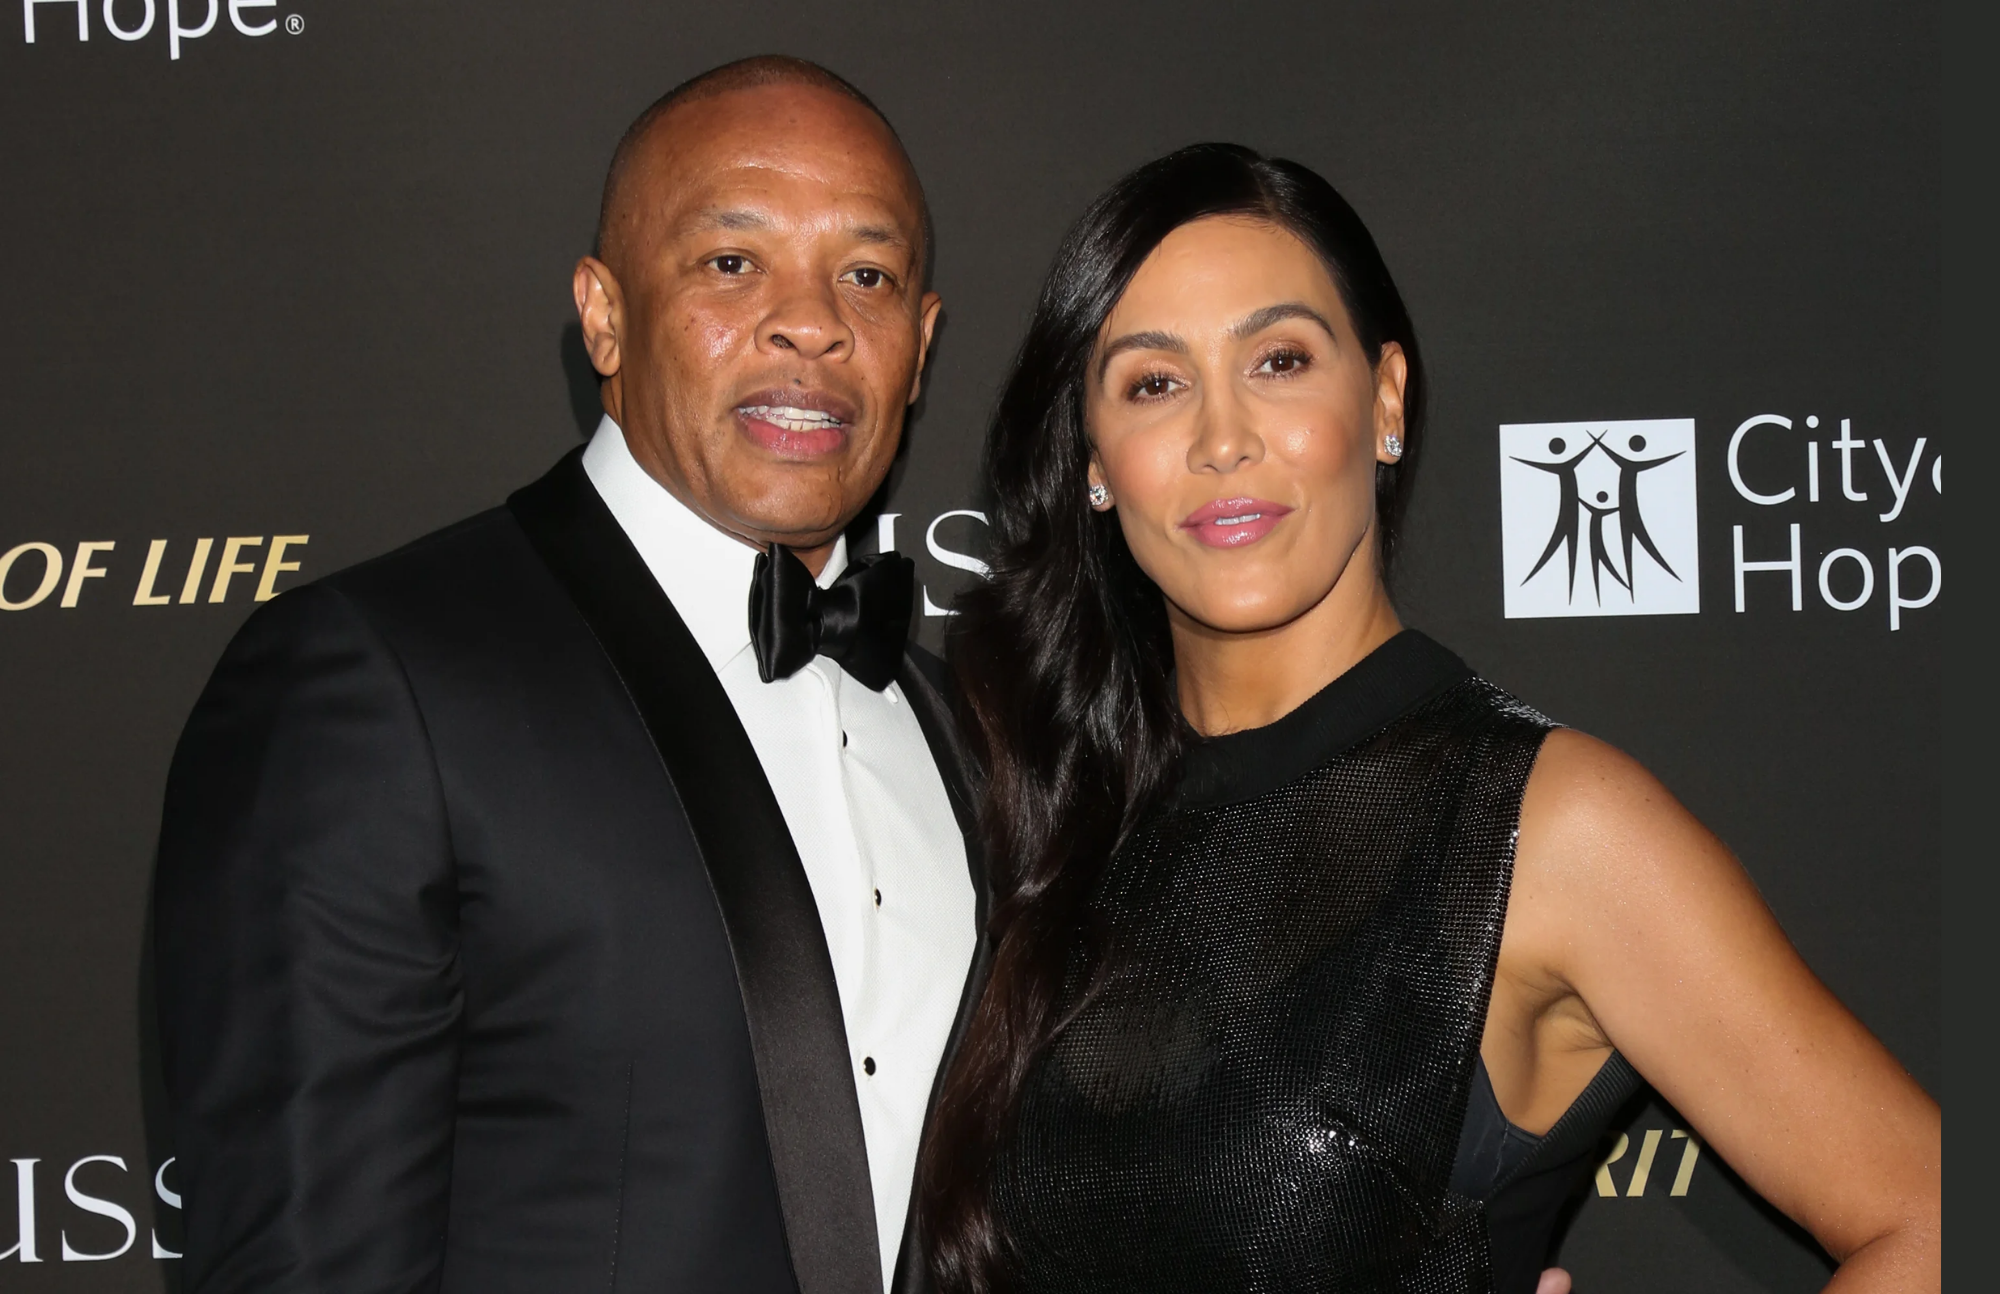 Dr. Dre and his ex-wife Nicole Young attended an event together